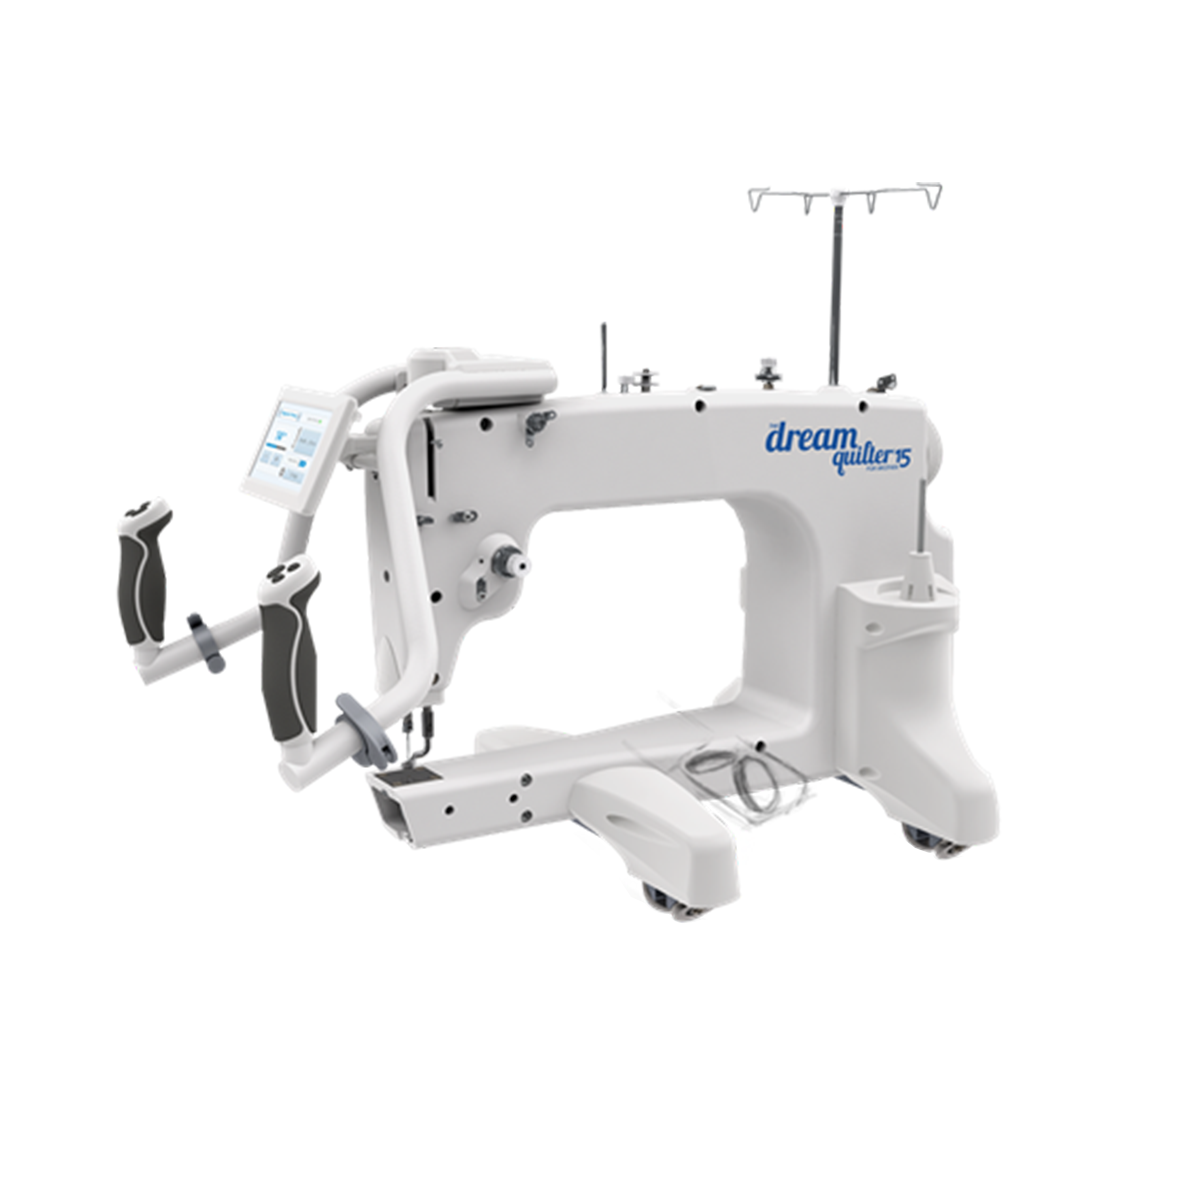 Brother Dream Quilter 15S DQLT15S Mid Arm Quilting Machine